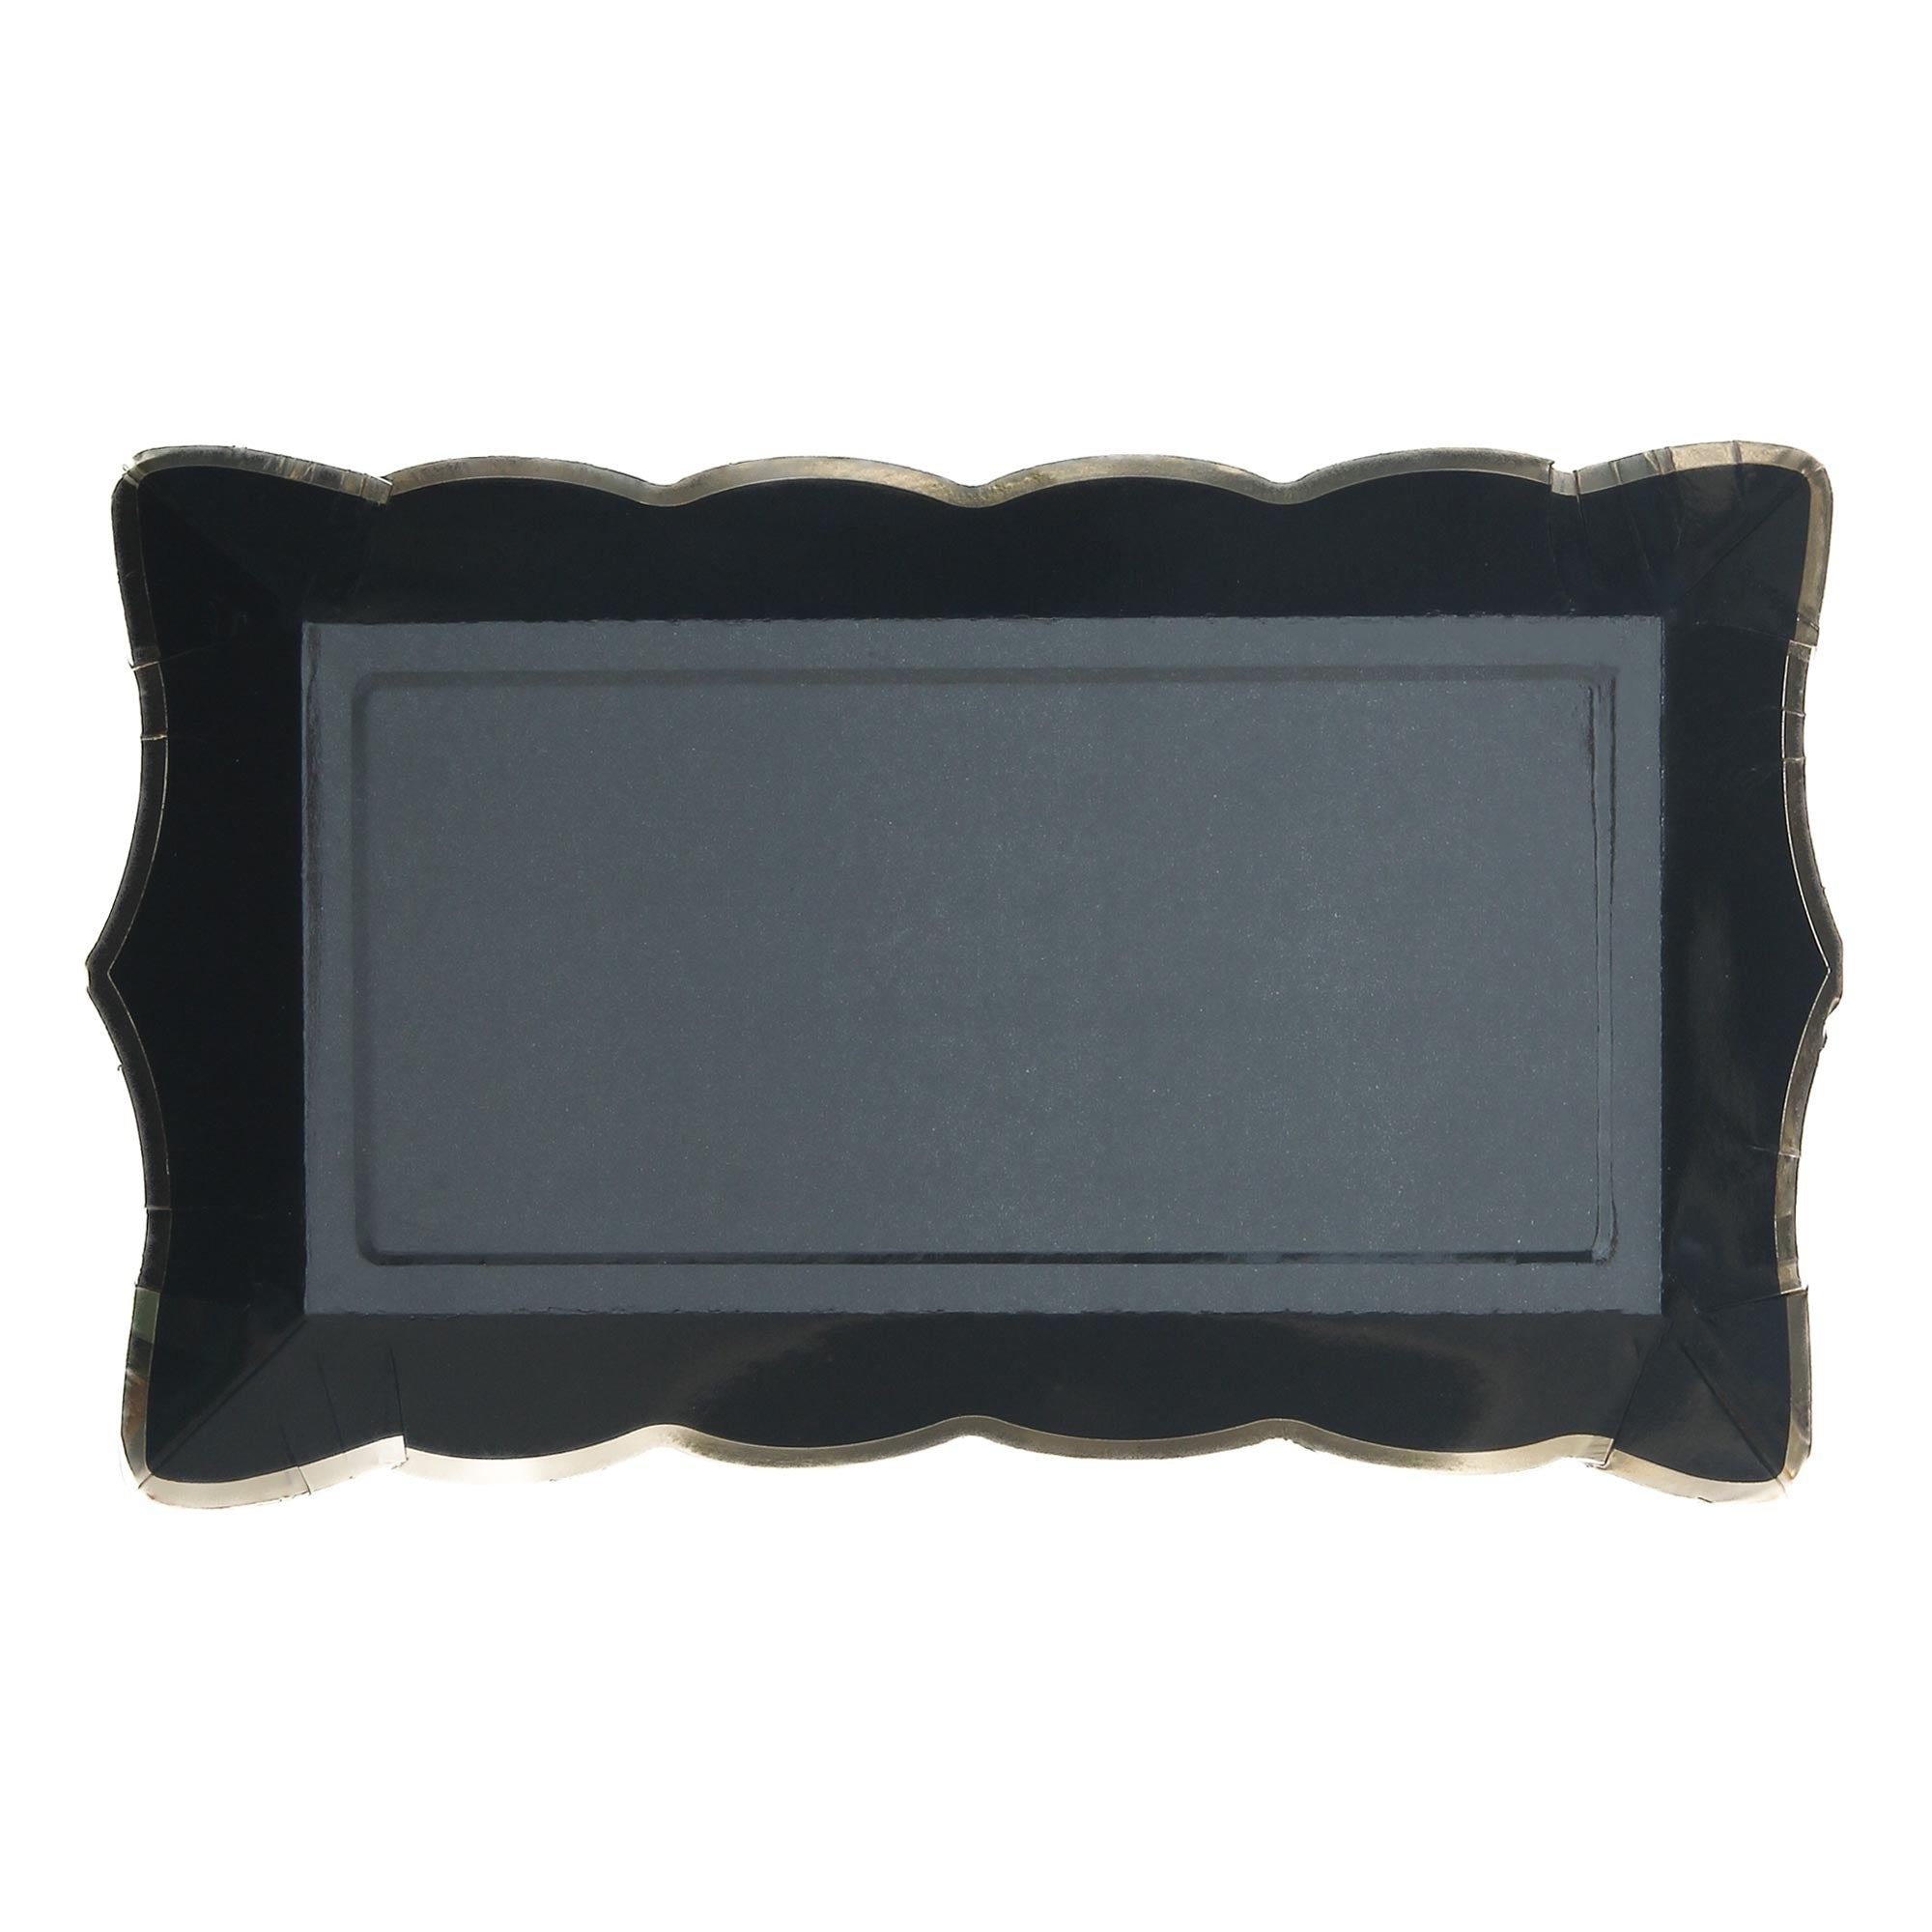 Black Rectangular Trays, 9 Inches, 4 Count